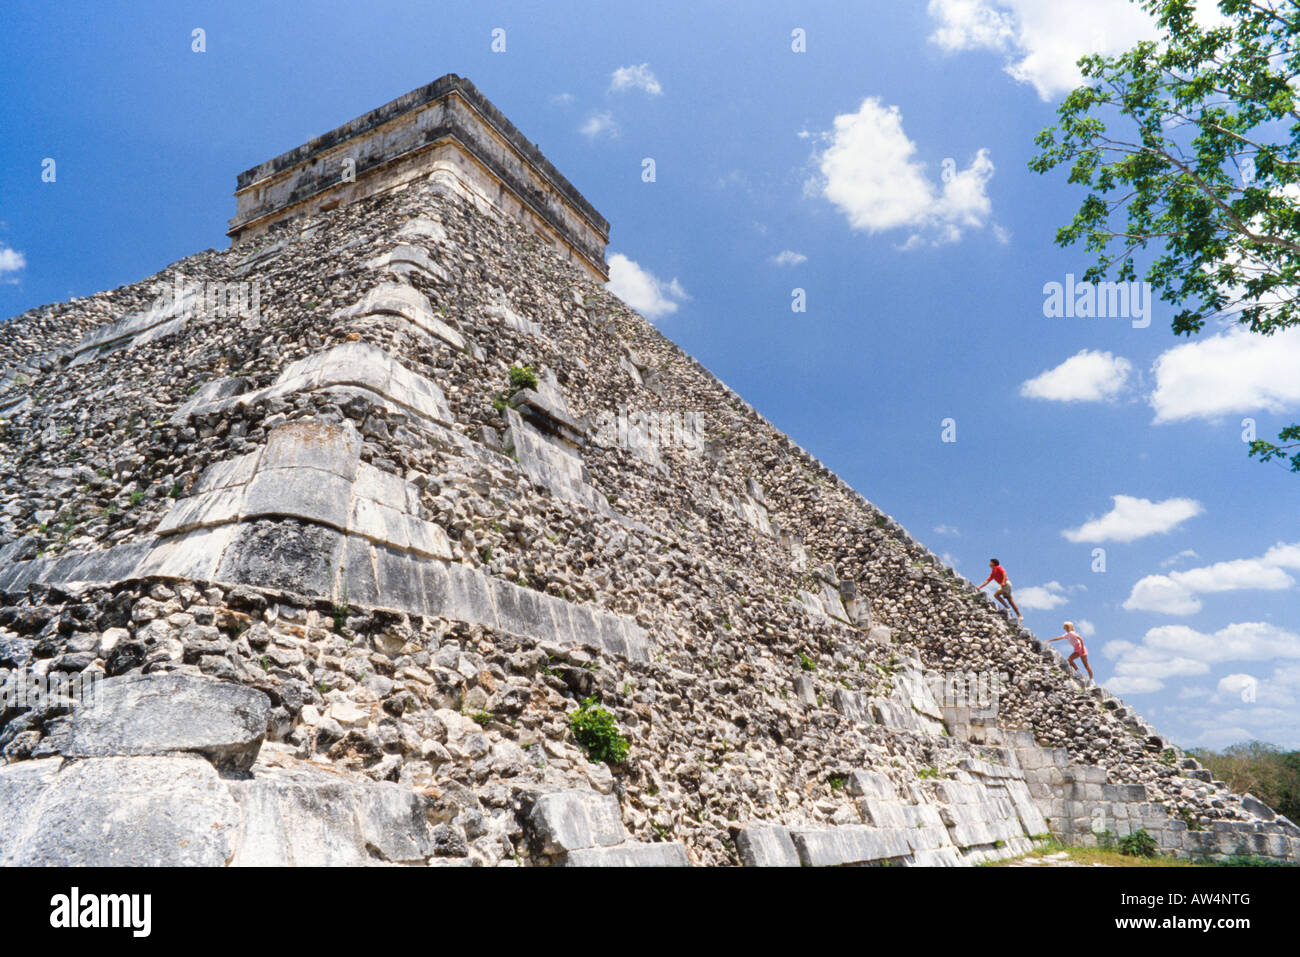 Couple on vaction in Mexico, climbing mayan pyramid Stock Photo